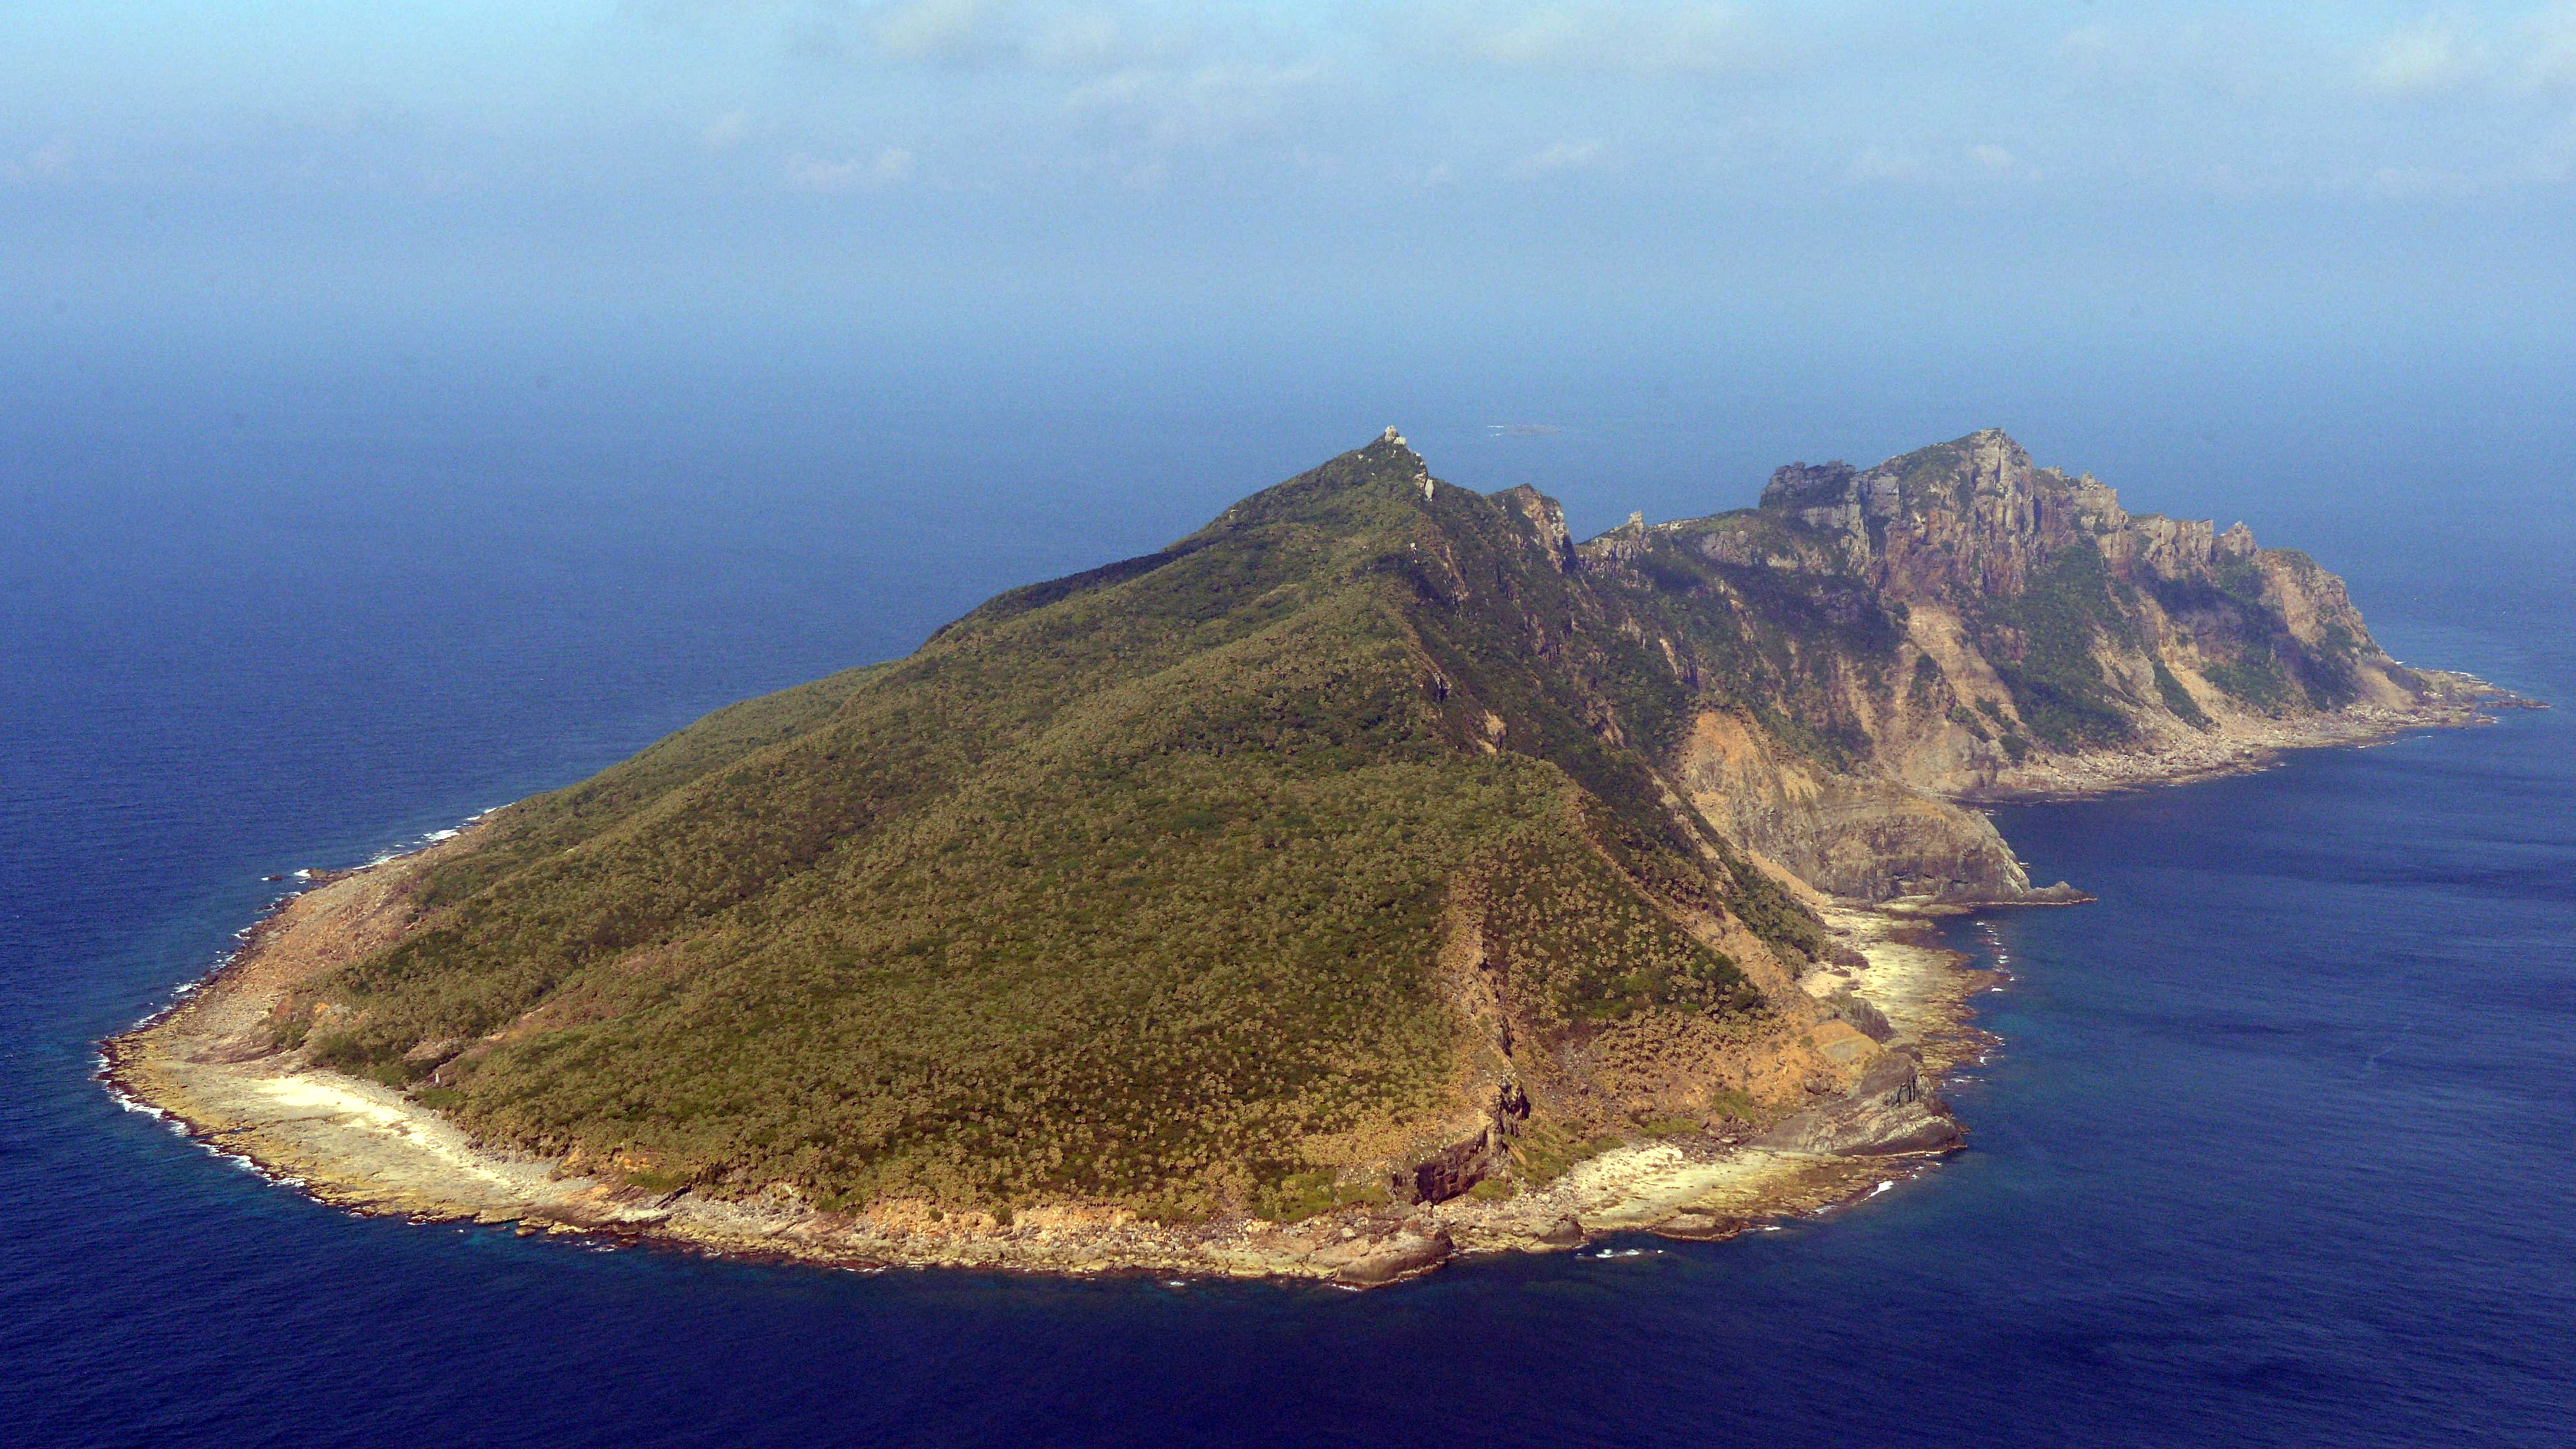 An aerial photo of Uotsuri Island, one of the disputed Senkaku Islands, also known as the Diaoyu Islands, on September 7, 2013.